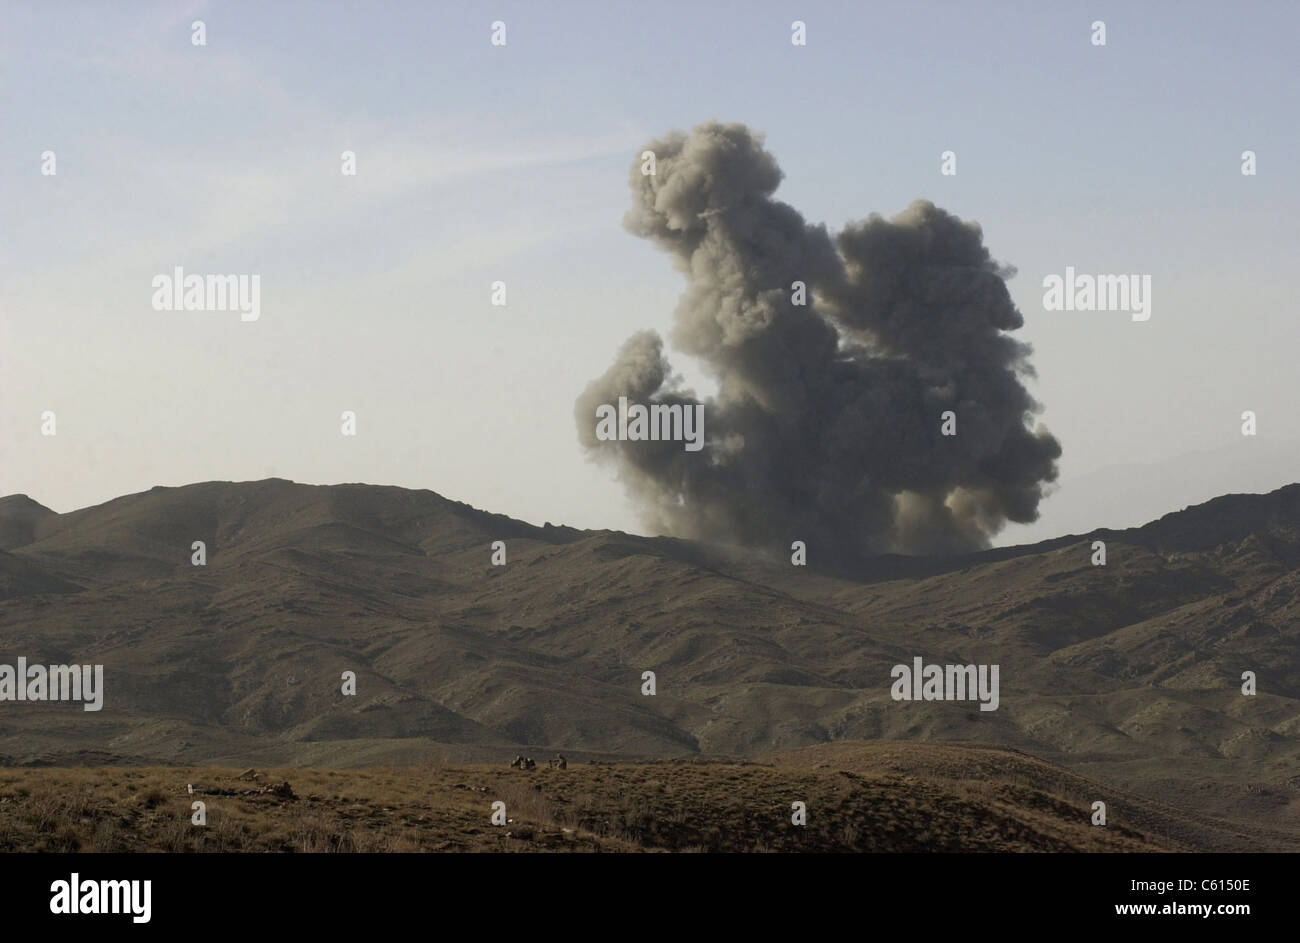 An enemy position in Afghanistan's Gardez Valley is destroyed by smart bombs dropped by B-52 bombers attacking al-Qaeda and Taliban forces. Mar. 10 2002., Photo by:Everett Collection(BSLOC 2011 6 41) Stock Photo